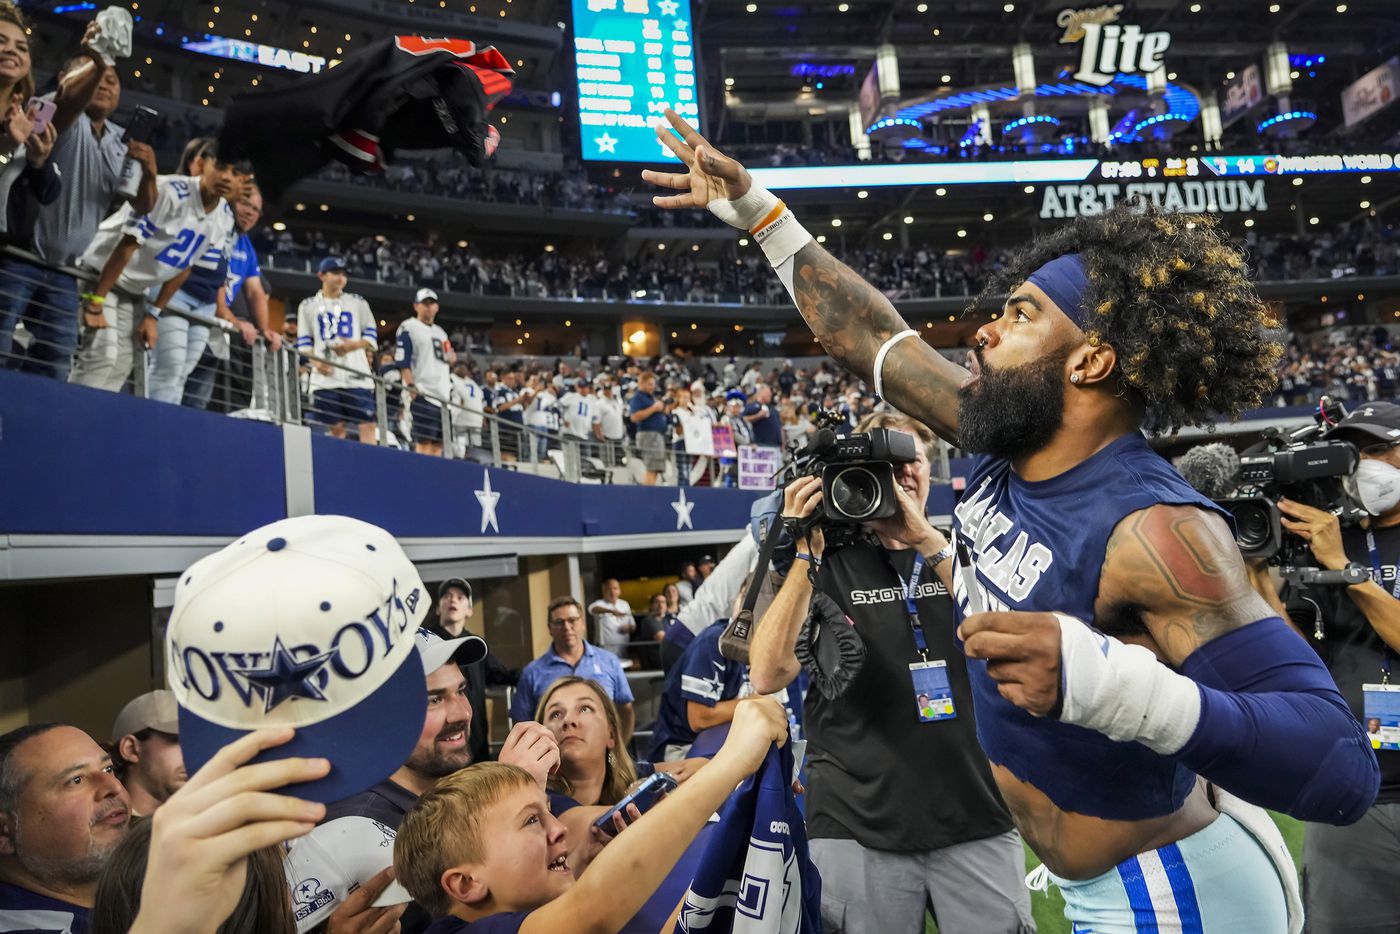 Dallas Cowboys running back Ezekiel Elliott tosses a jersey back to a fan after autographing it as he leaves the field following a victory over the Washington Football Team in an NFL football game at AT&T Stadium on Sunday, Dec. 26, 2021, in Arlington. The Cowboys won the game 56-14.